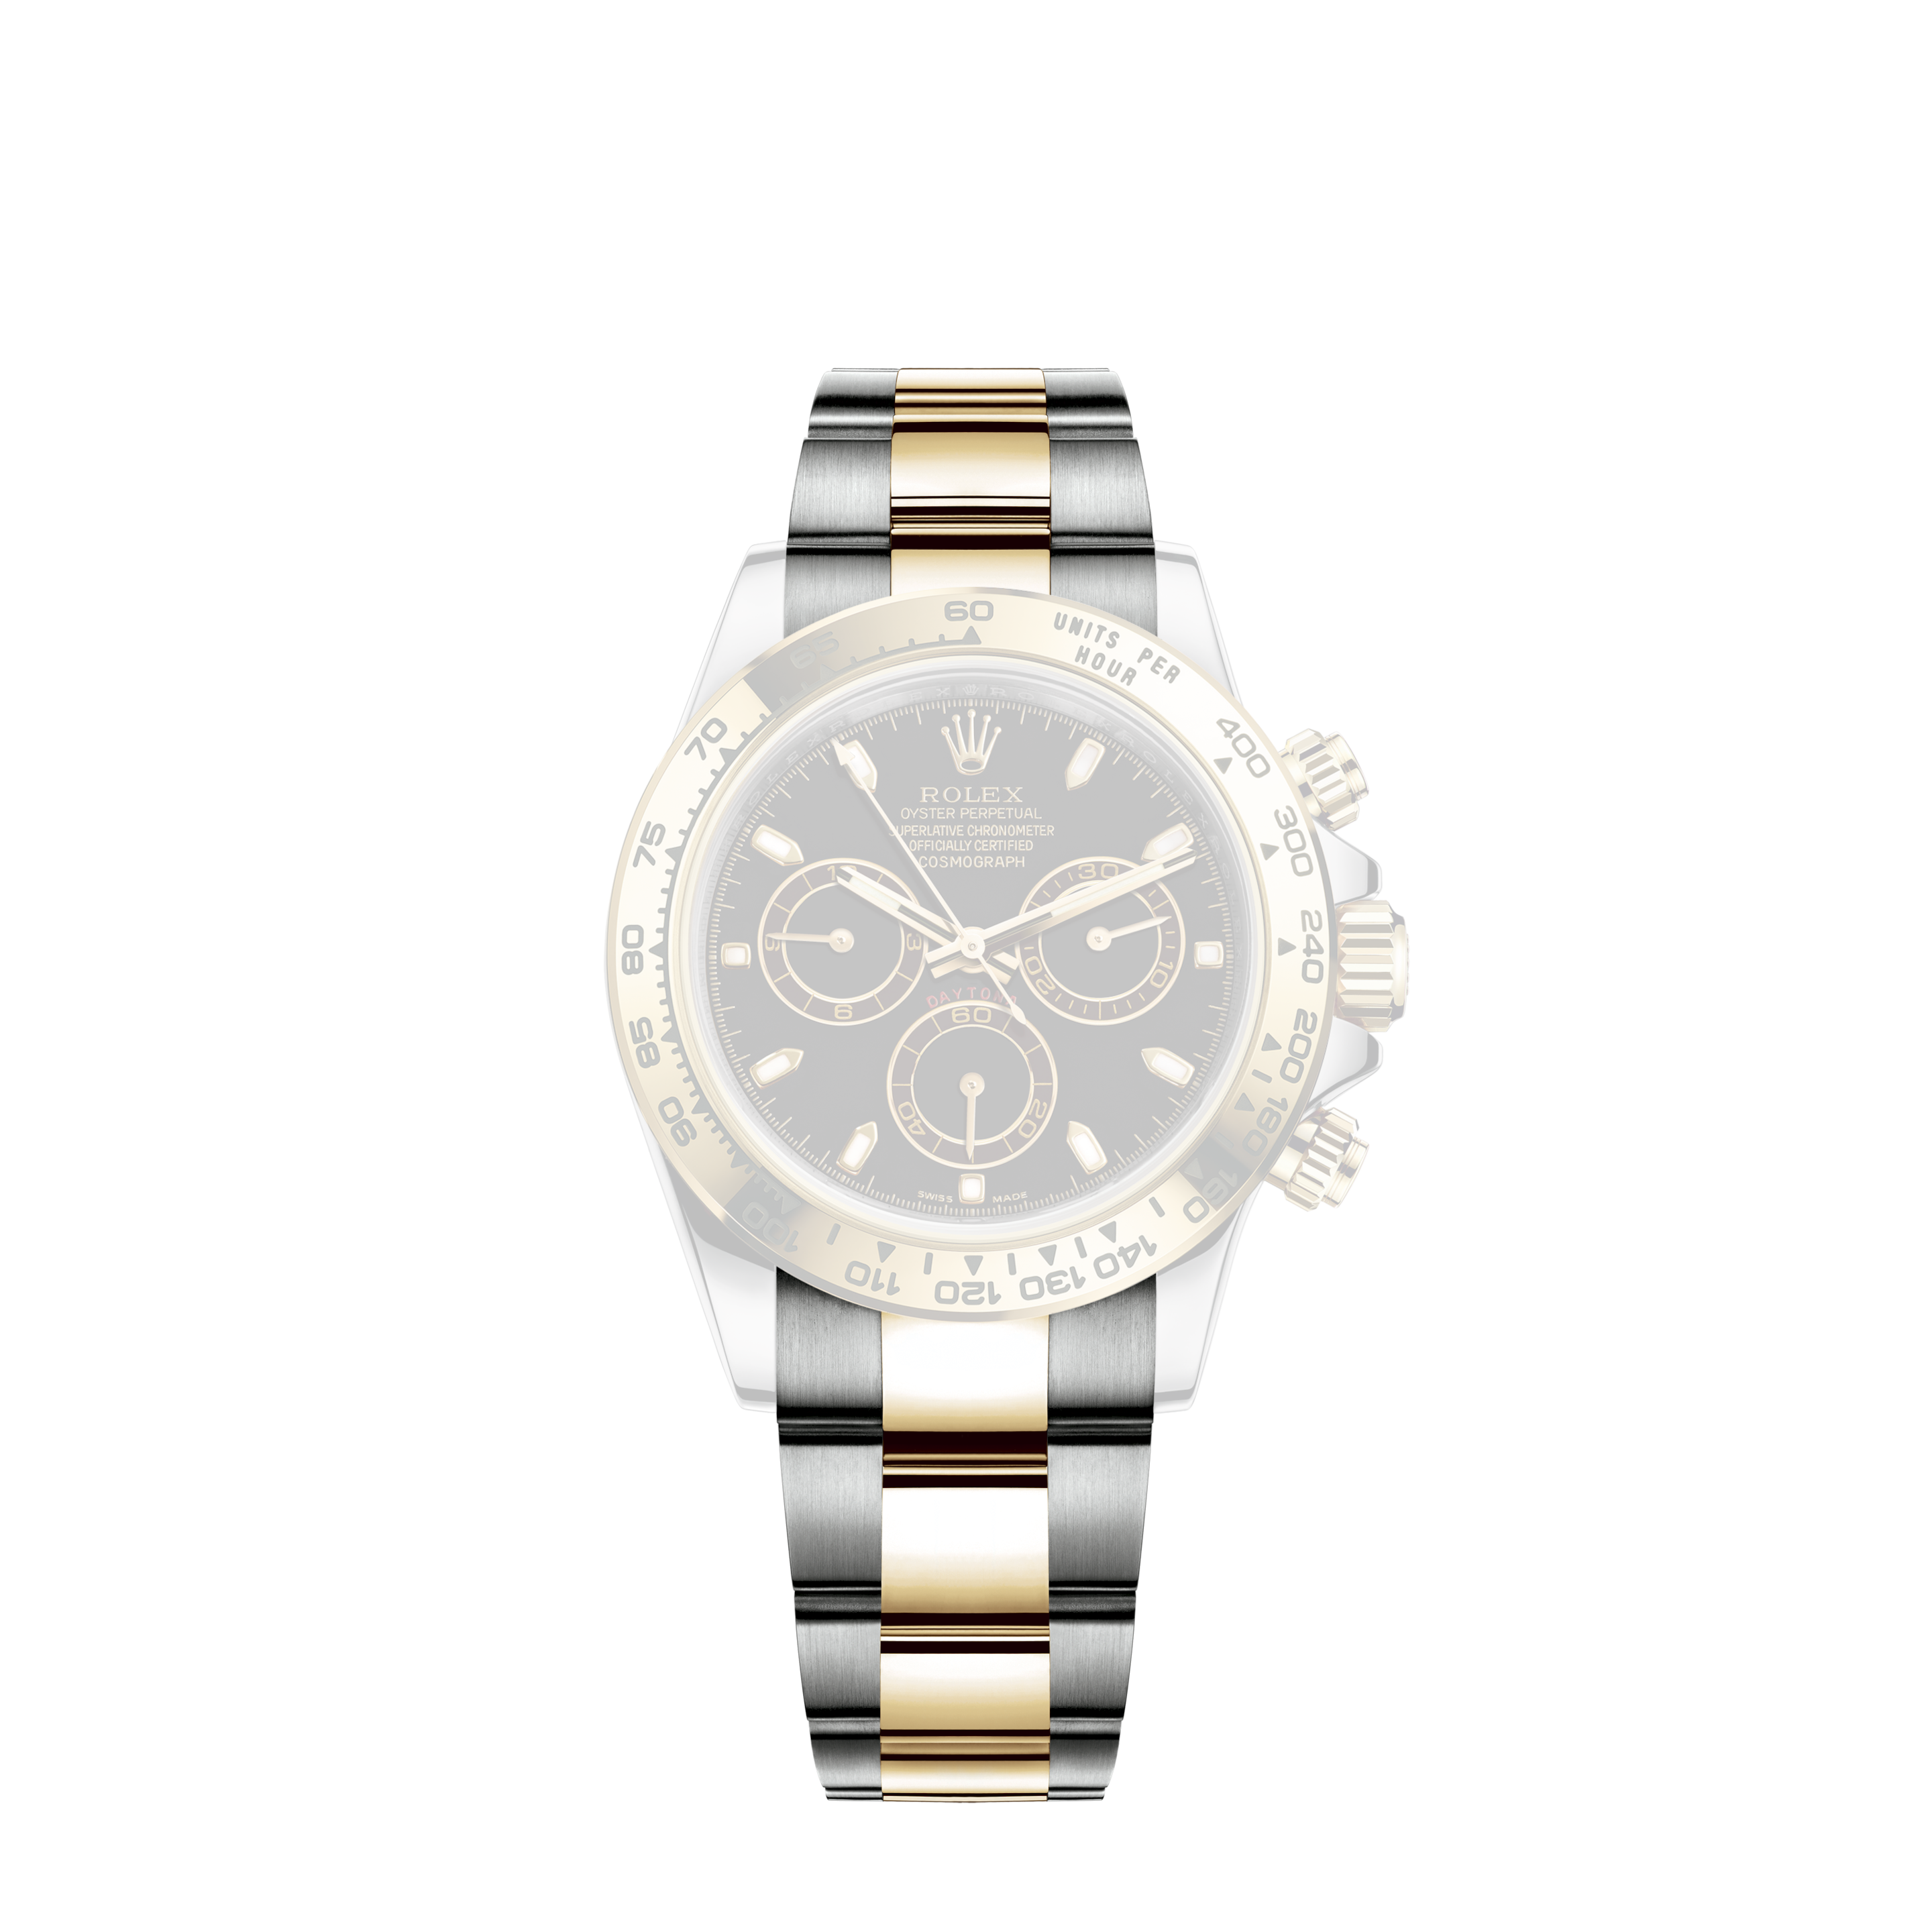 Rolex Datejust 36mm Steel & Yellow Gold Fluted Bezel Champagne Index Dial Oyster Bracelet